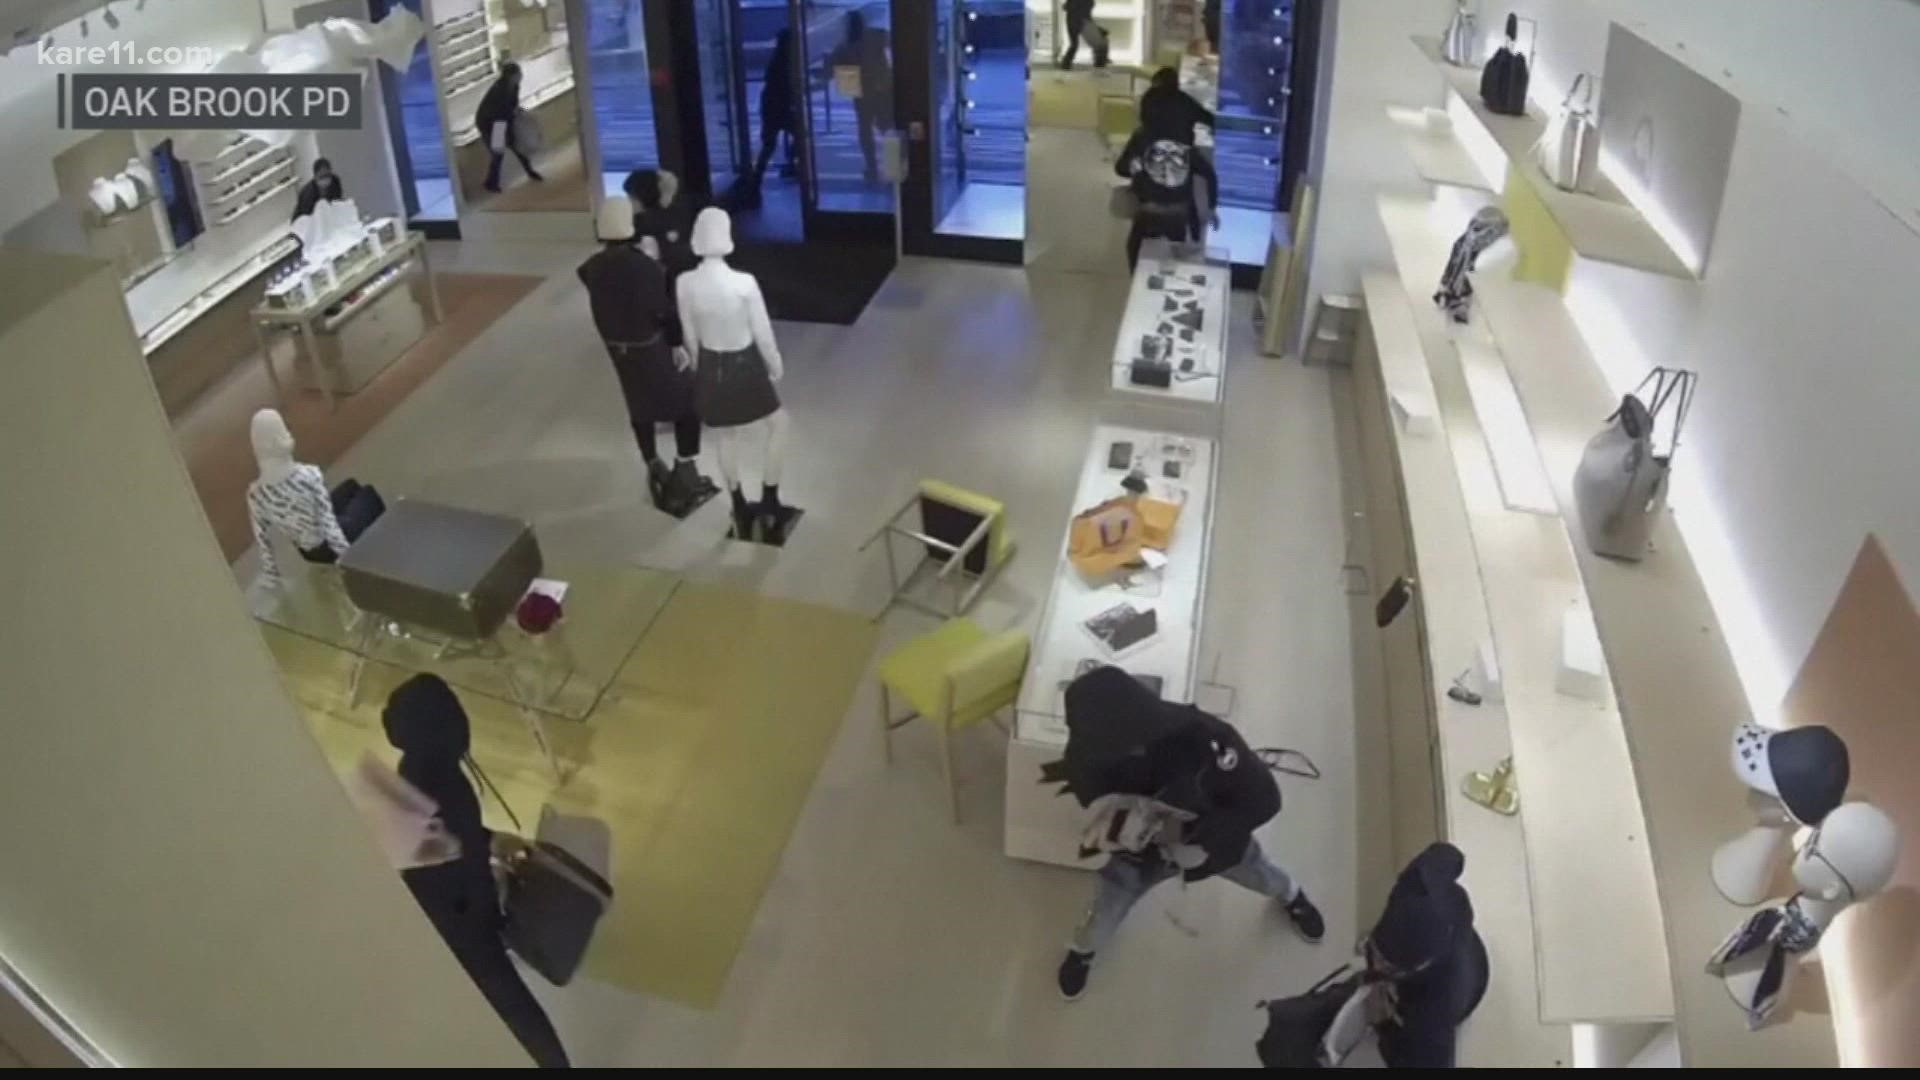 9 Charged In Smash-and-Grab Robberies at Louis Vuitton, Other